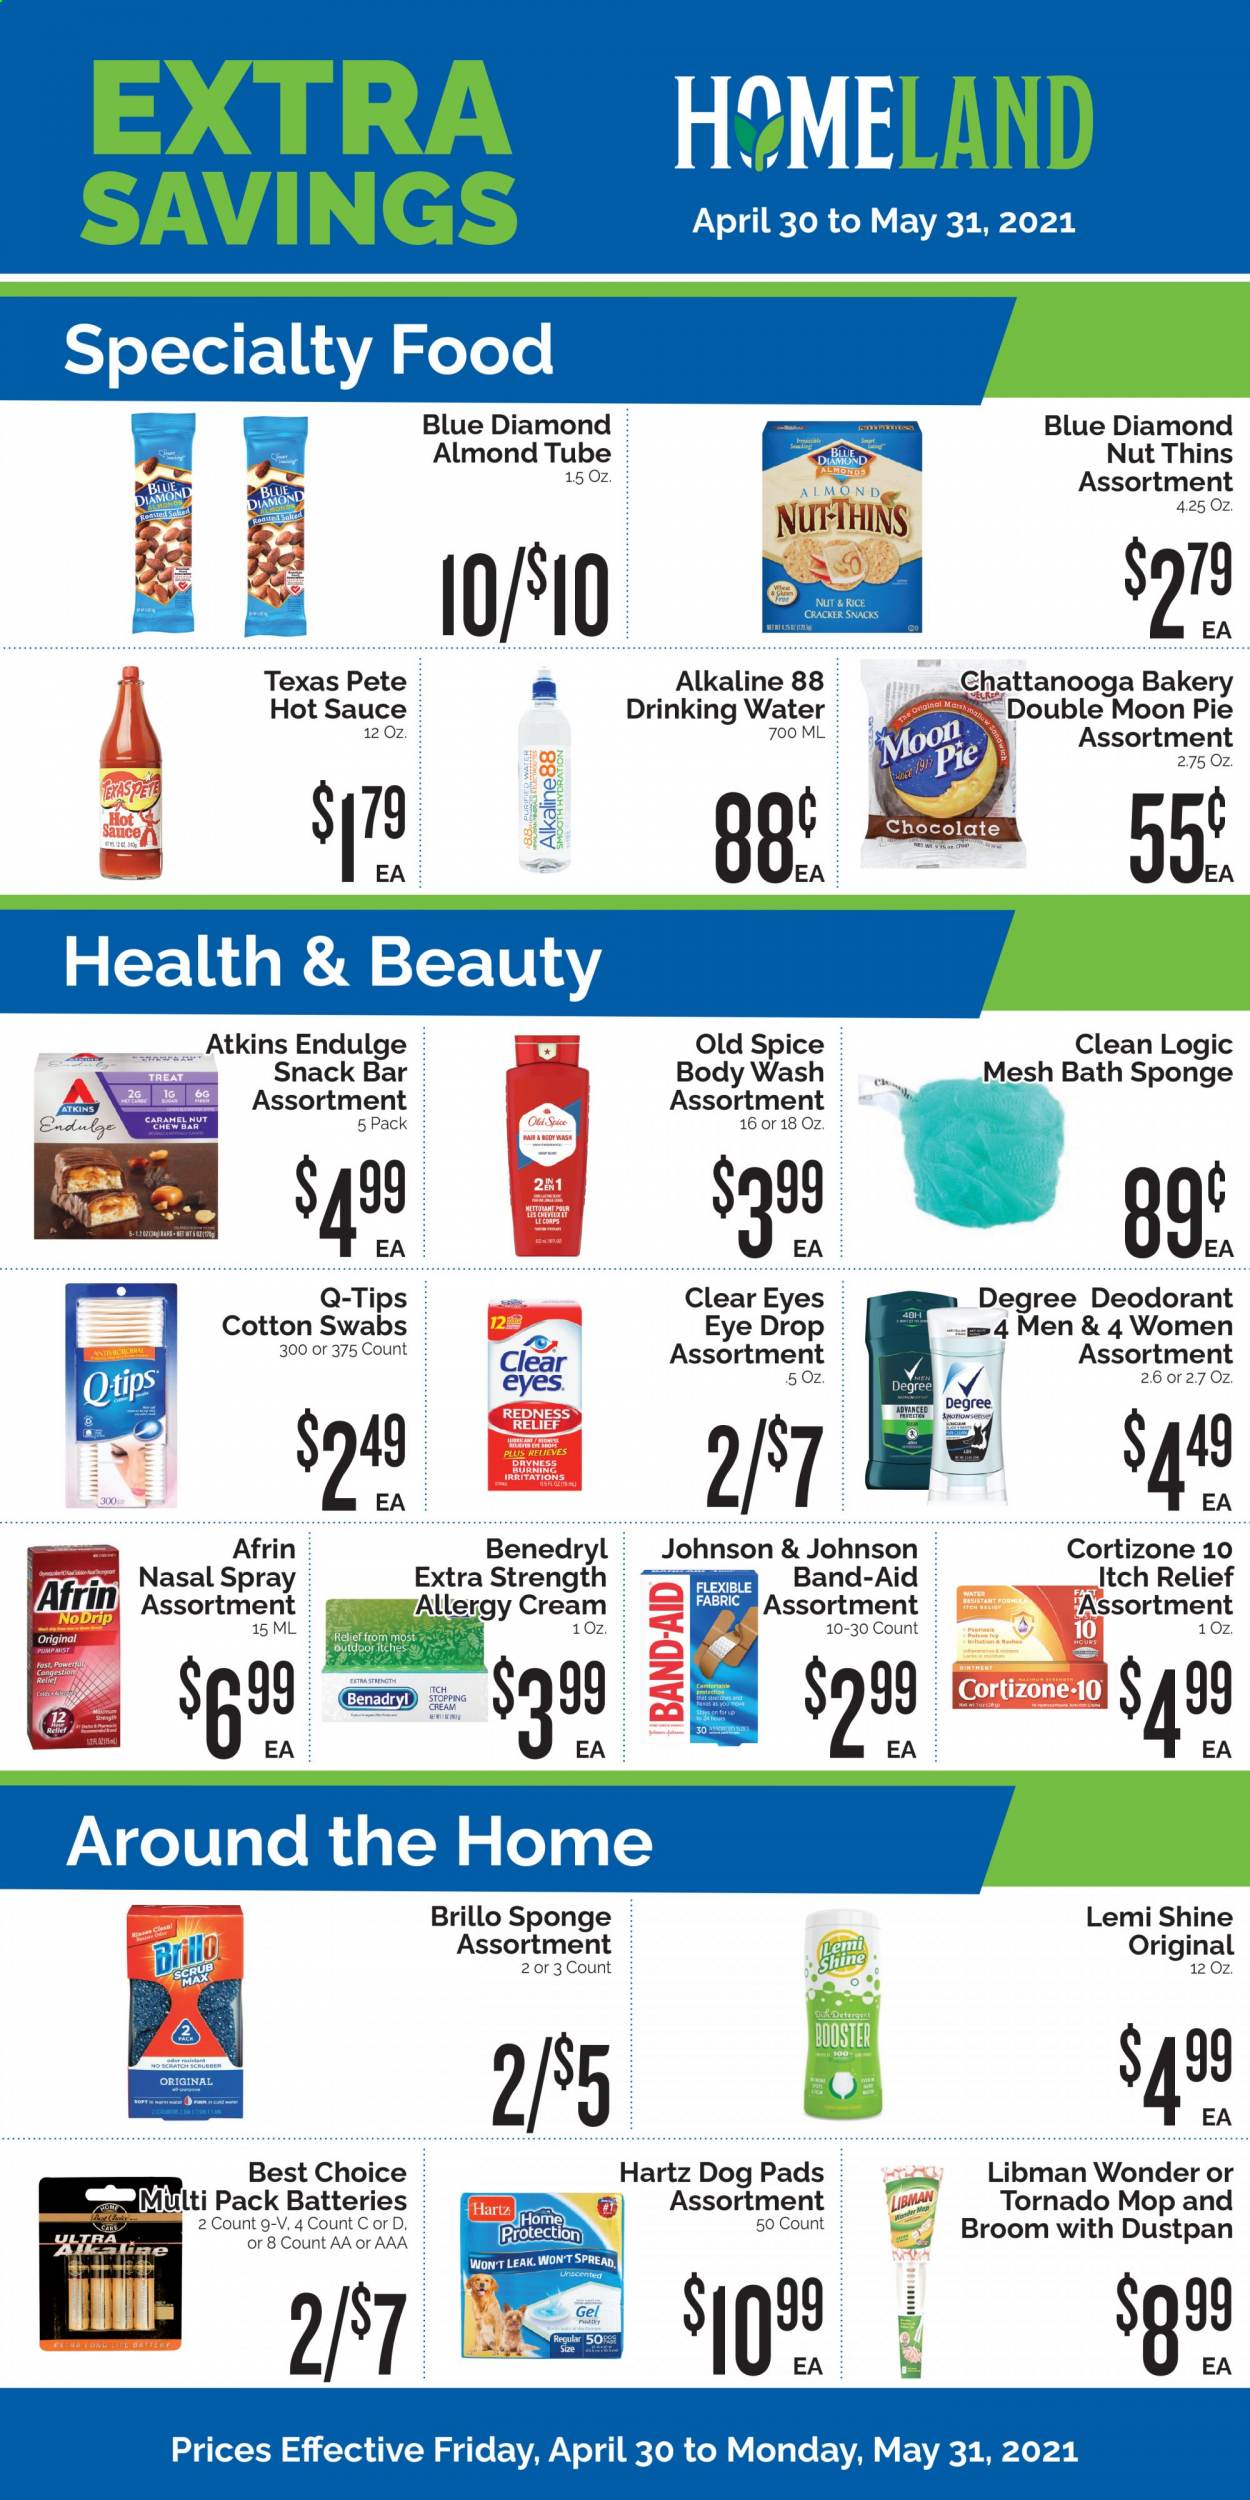 thumbnail - Homeland Flyer - 04/30/2021 - 05/31/2021 - Sales products - pie, sauce, marshmallows, chocolate, snack, crackers, snack bar, Thins, rice crackers, sugar, rice, spice, caramel, hot sauce, almonds, Blue Diamond, Johnson's, ointment, detergent, body wash, hair & body wash, Old Spice, Lemi Shine, anti-perspirant, deodorant, lubricant, Afrin, nasal spray. Page 1.